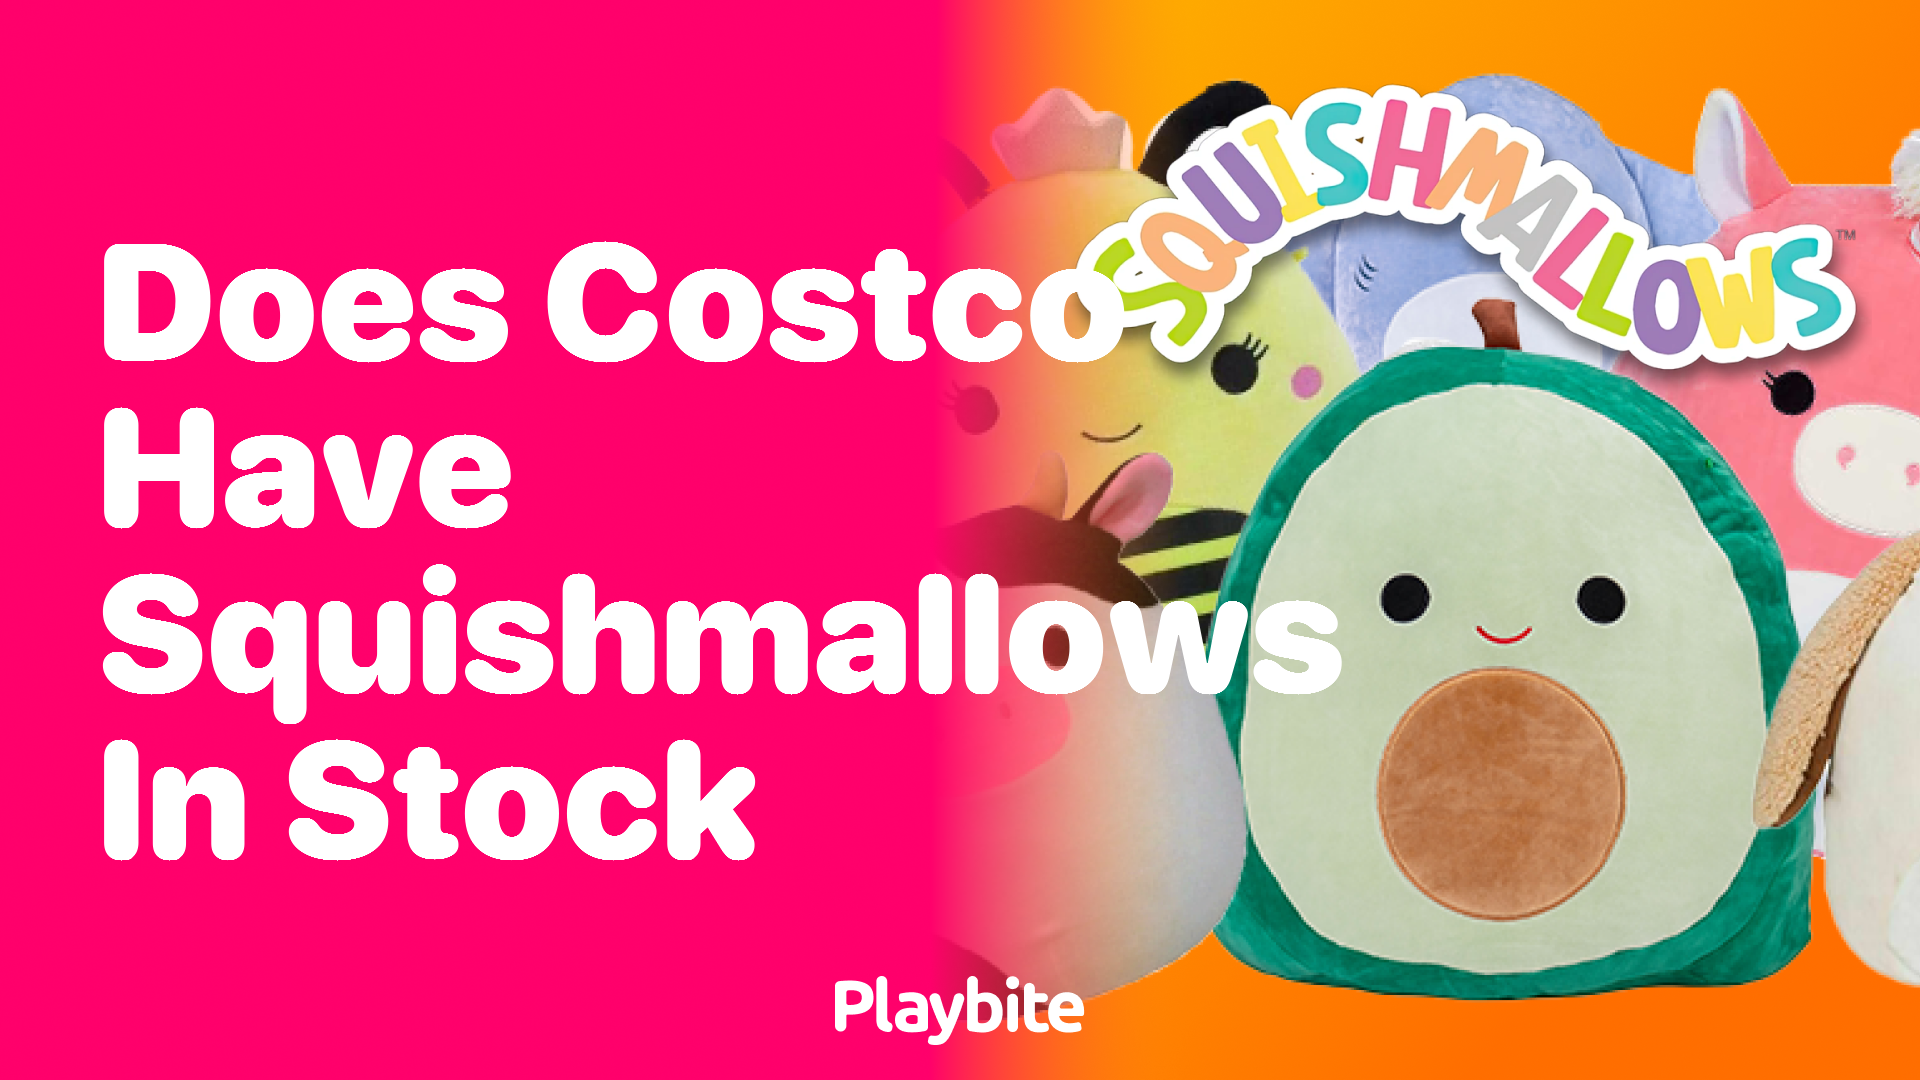 Does Costco Have Squishmallows in Stock? Find Out Here!